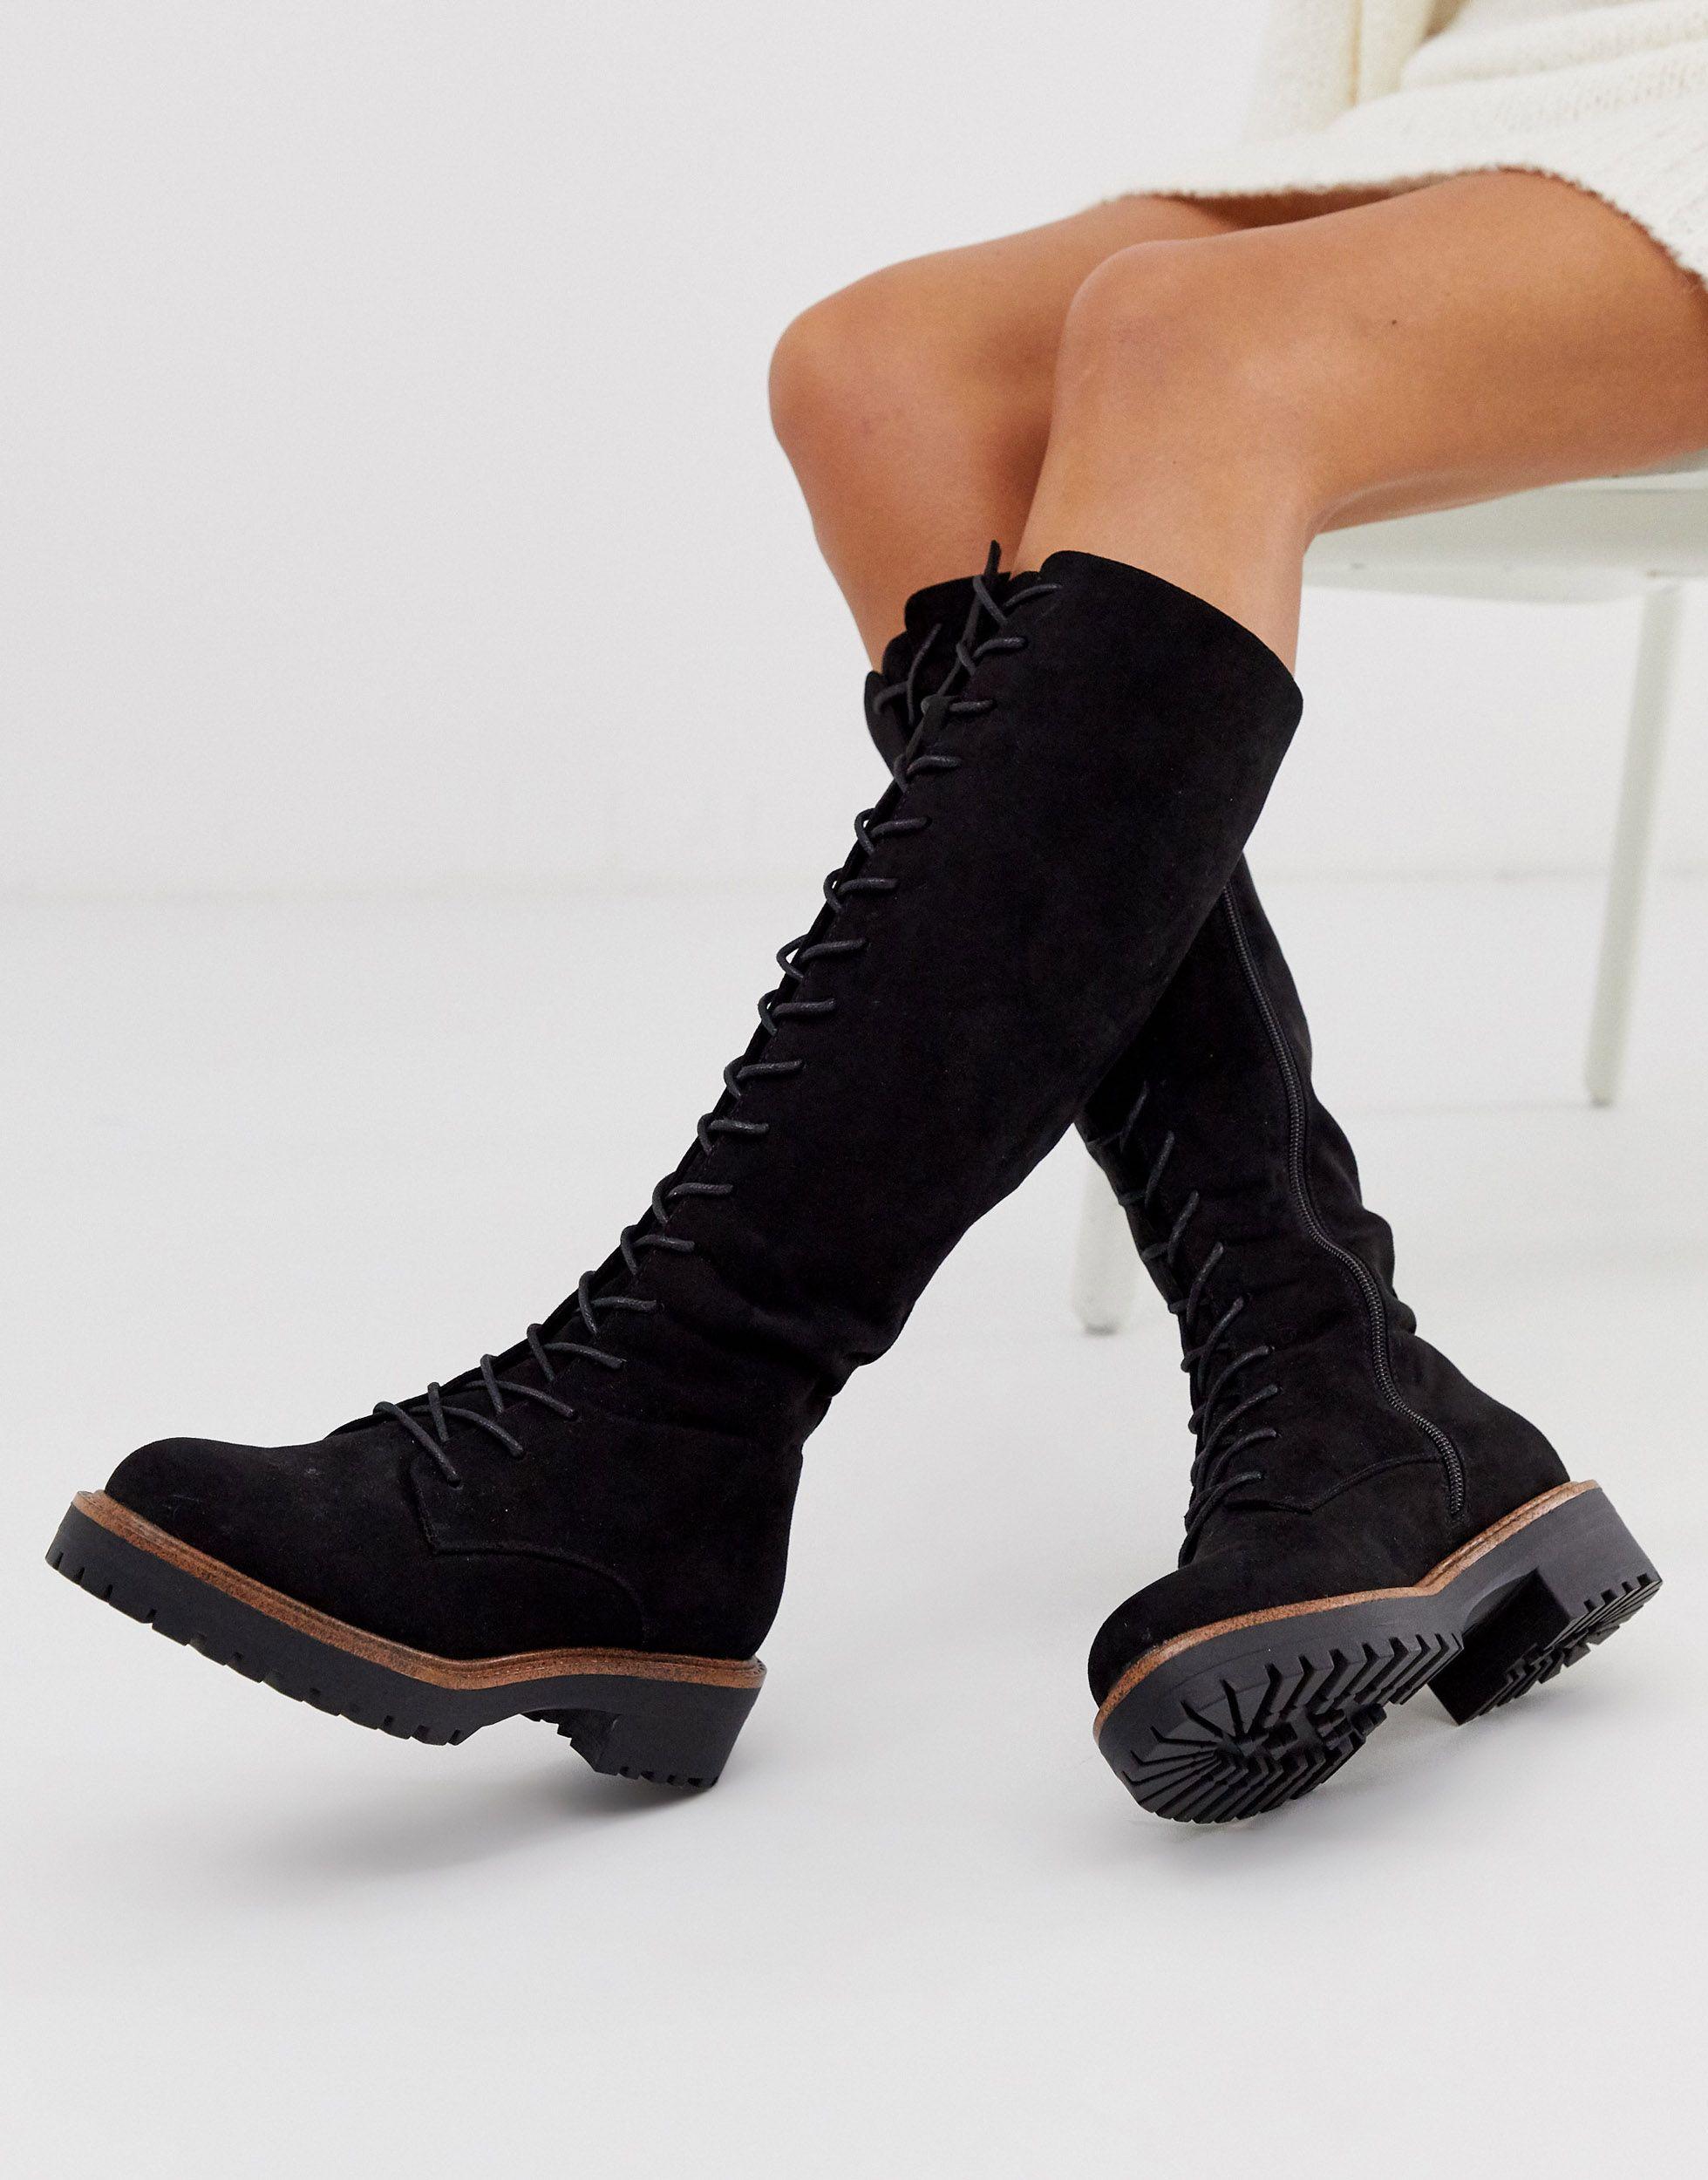 lace up boots knee